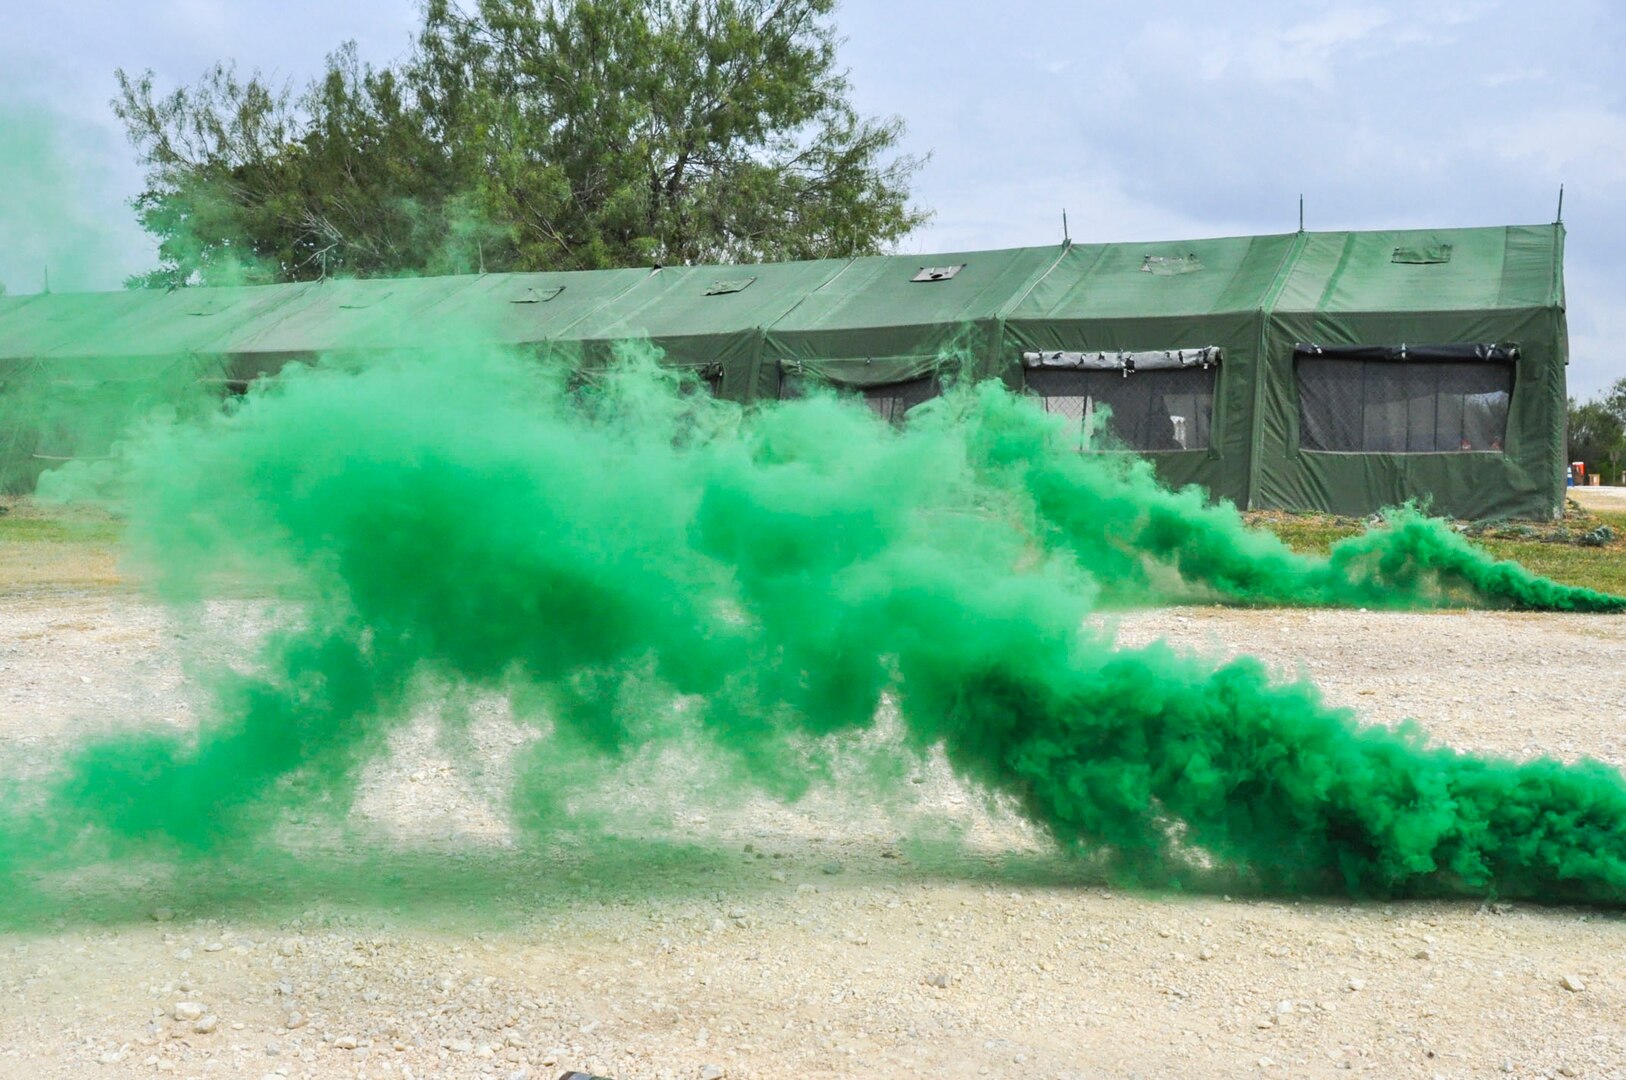 Smoke fills the area surrounding the tent members of the 433rd Airlift Wing are residing in to simulate a chemical attack during the wing's Steel Thunder exercise Nov. 5, 2016 at Joint Base San Antonio-Lackland. The exercise provided Alamo Wing Airmen a chance to don Mission Oriented Protective Posture gear and react to multiple scenarios during a simulated chemical attack. (U.S. Air Force photo/Senior Airman Bryan Swink)